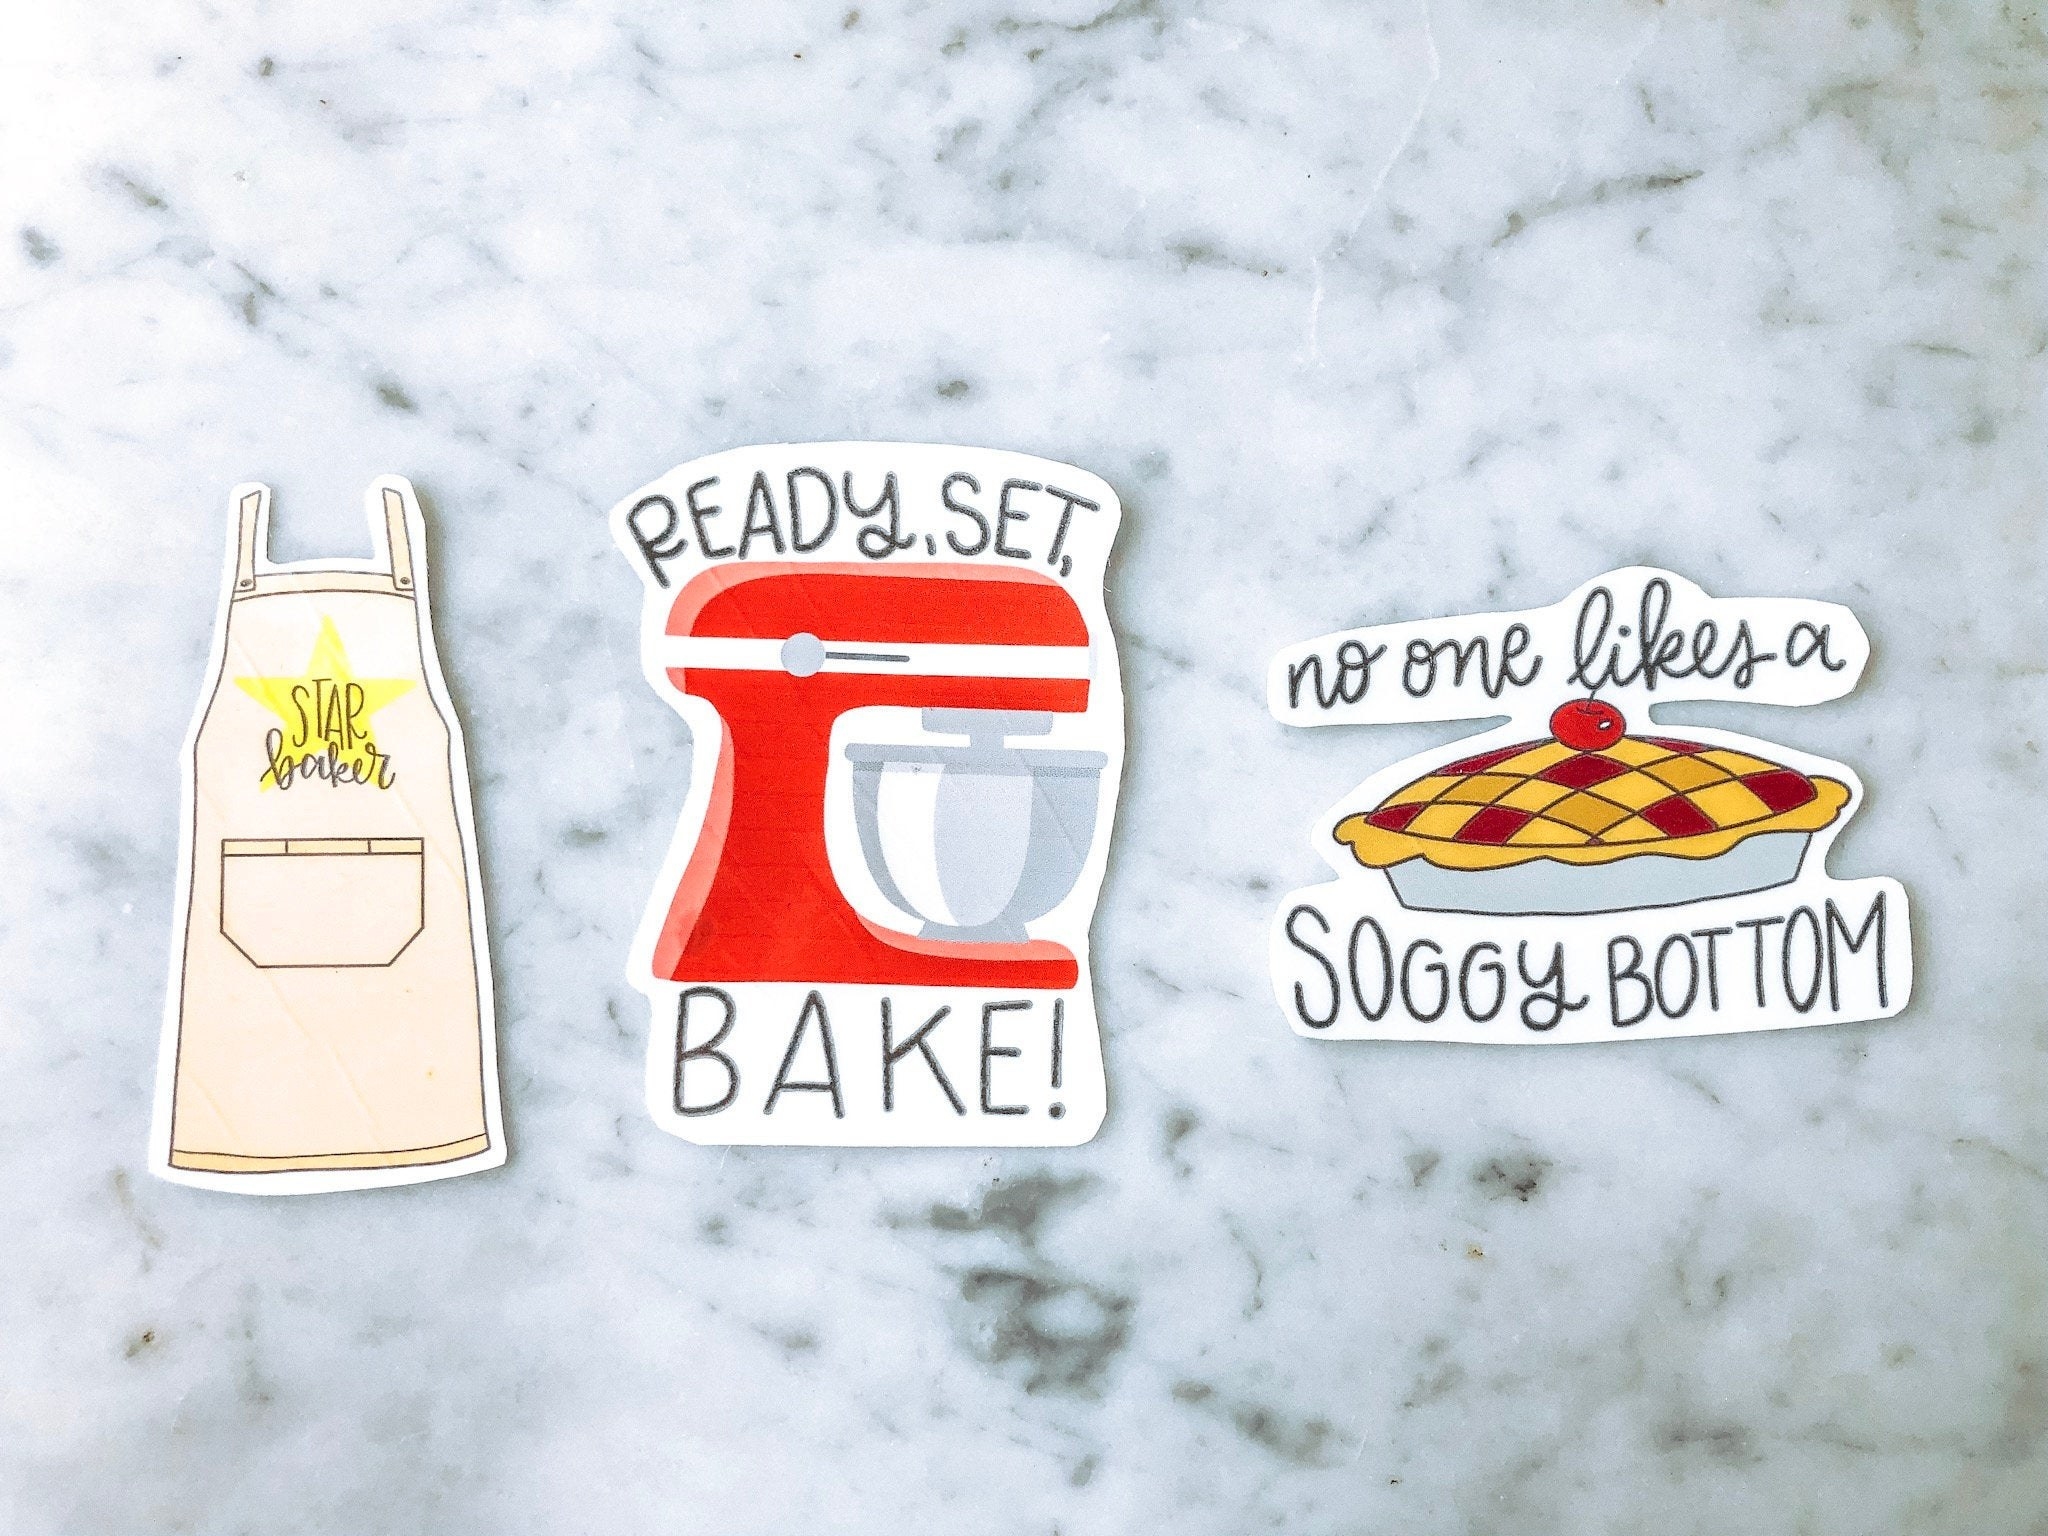 a set of three stickers: the first is an apron that says star baker, the second is a mixer that says ready set bake, the third is a pie that says no one likes a soggy bottom